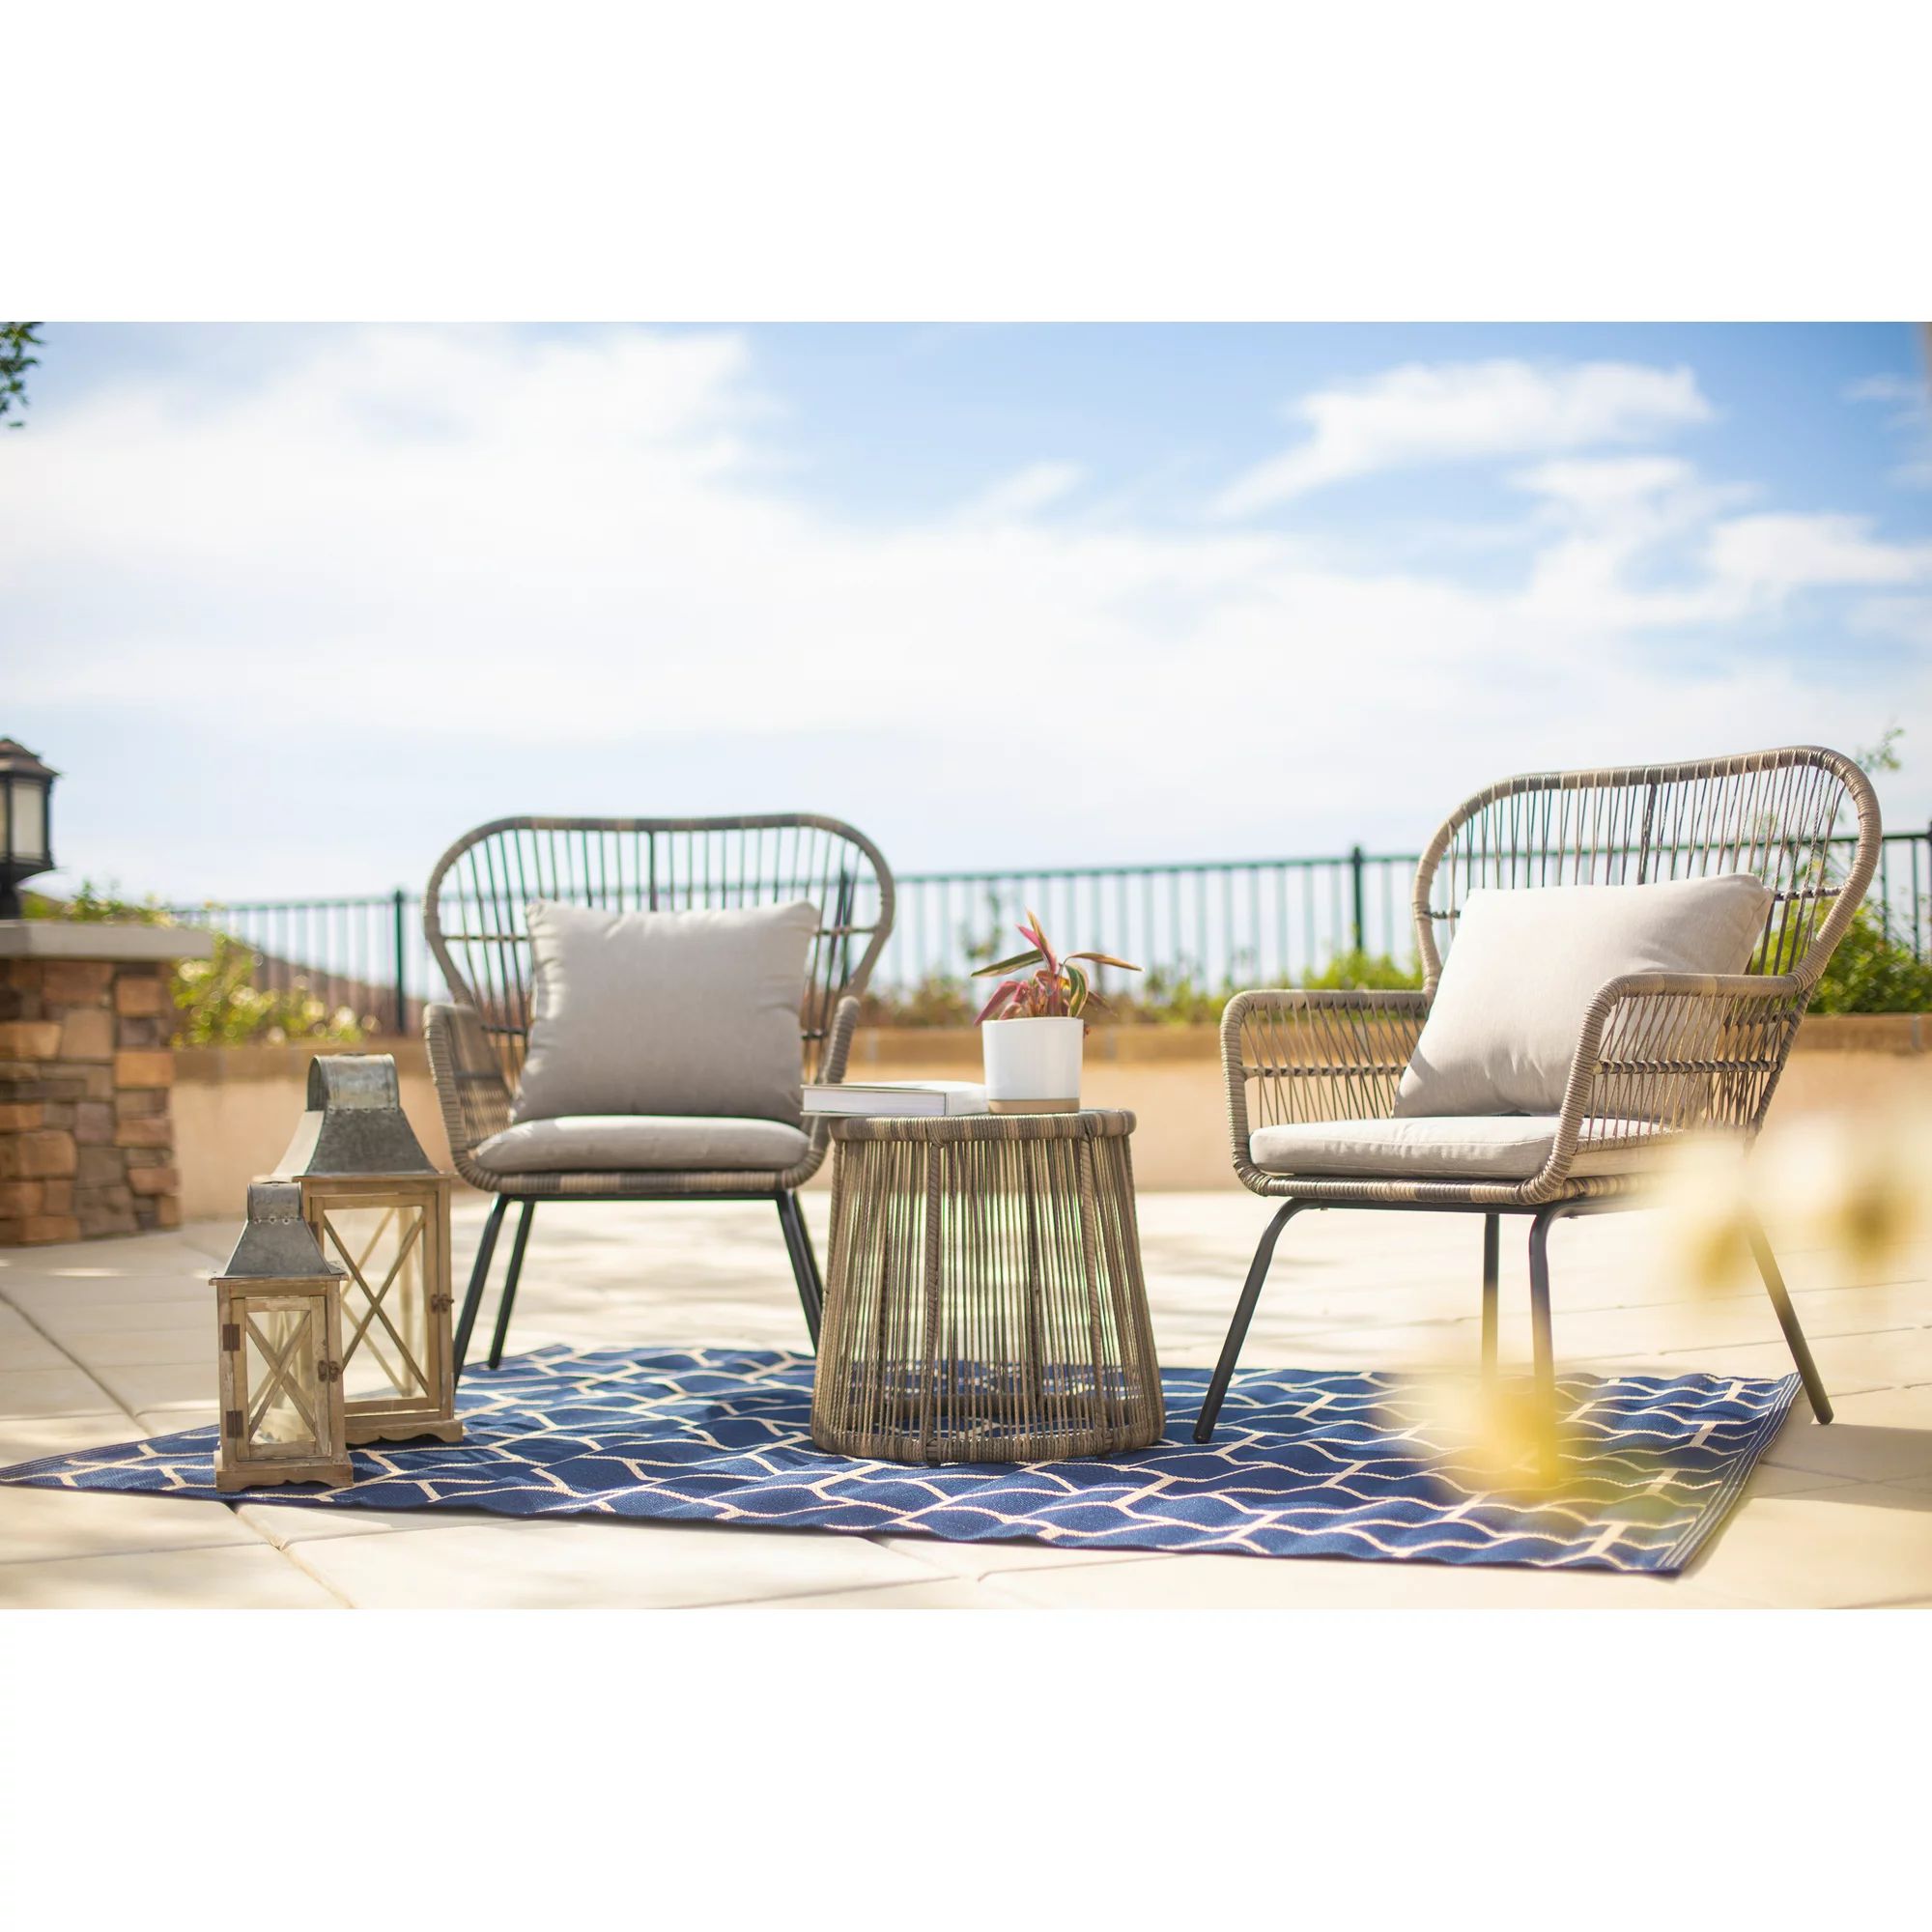 3 Pieces Outdoor Patio Bistro Wicker Chat 2 Chairs and Side Table with Cushion Seat | Walmart (US)